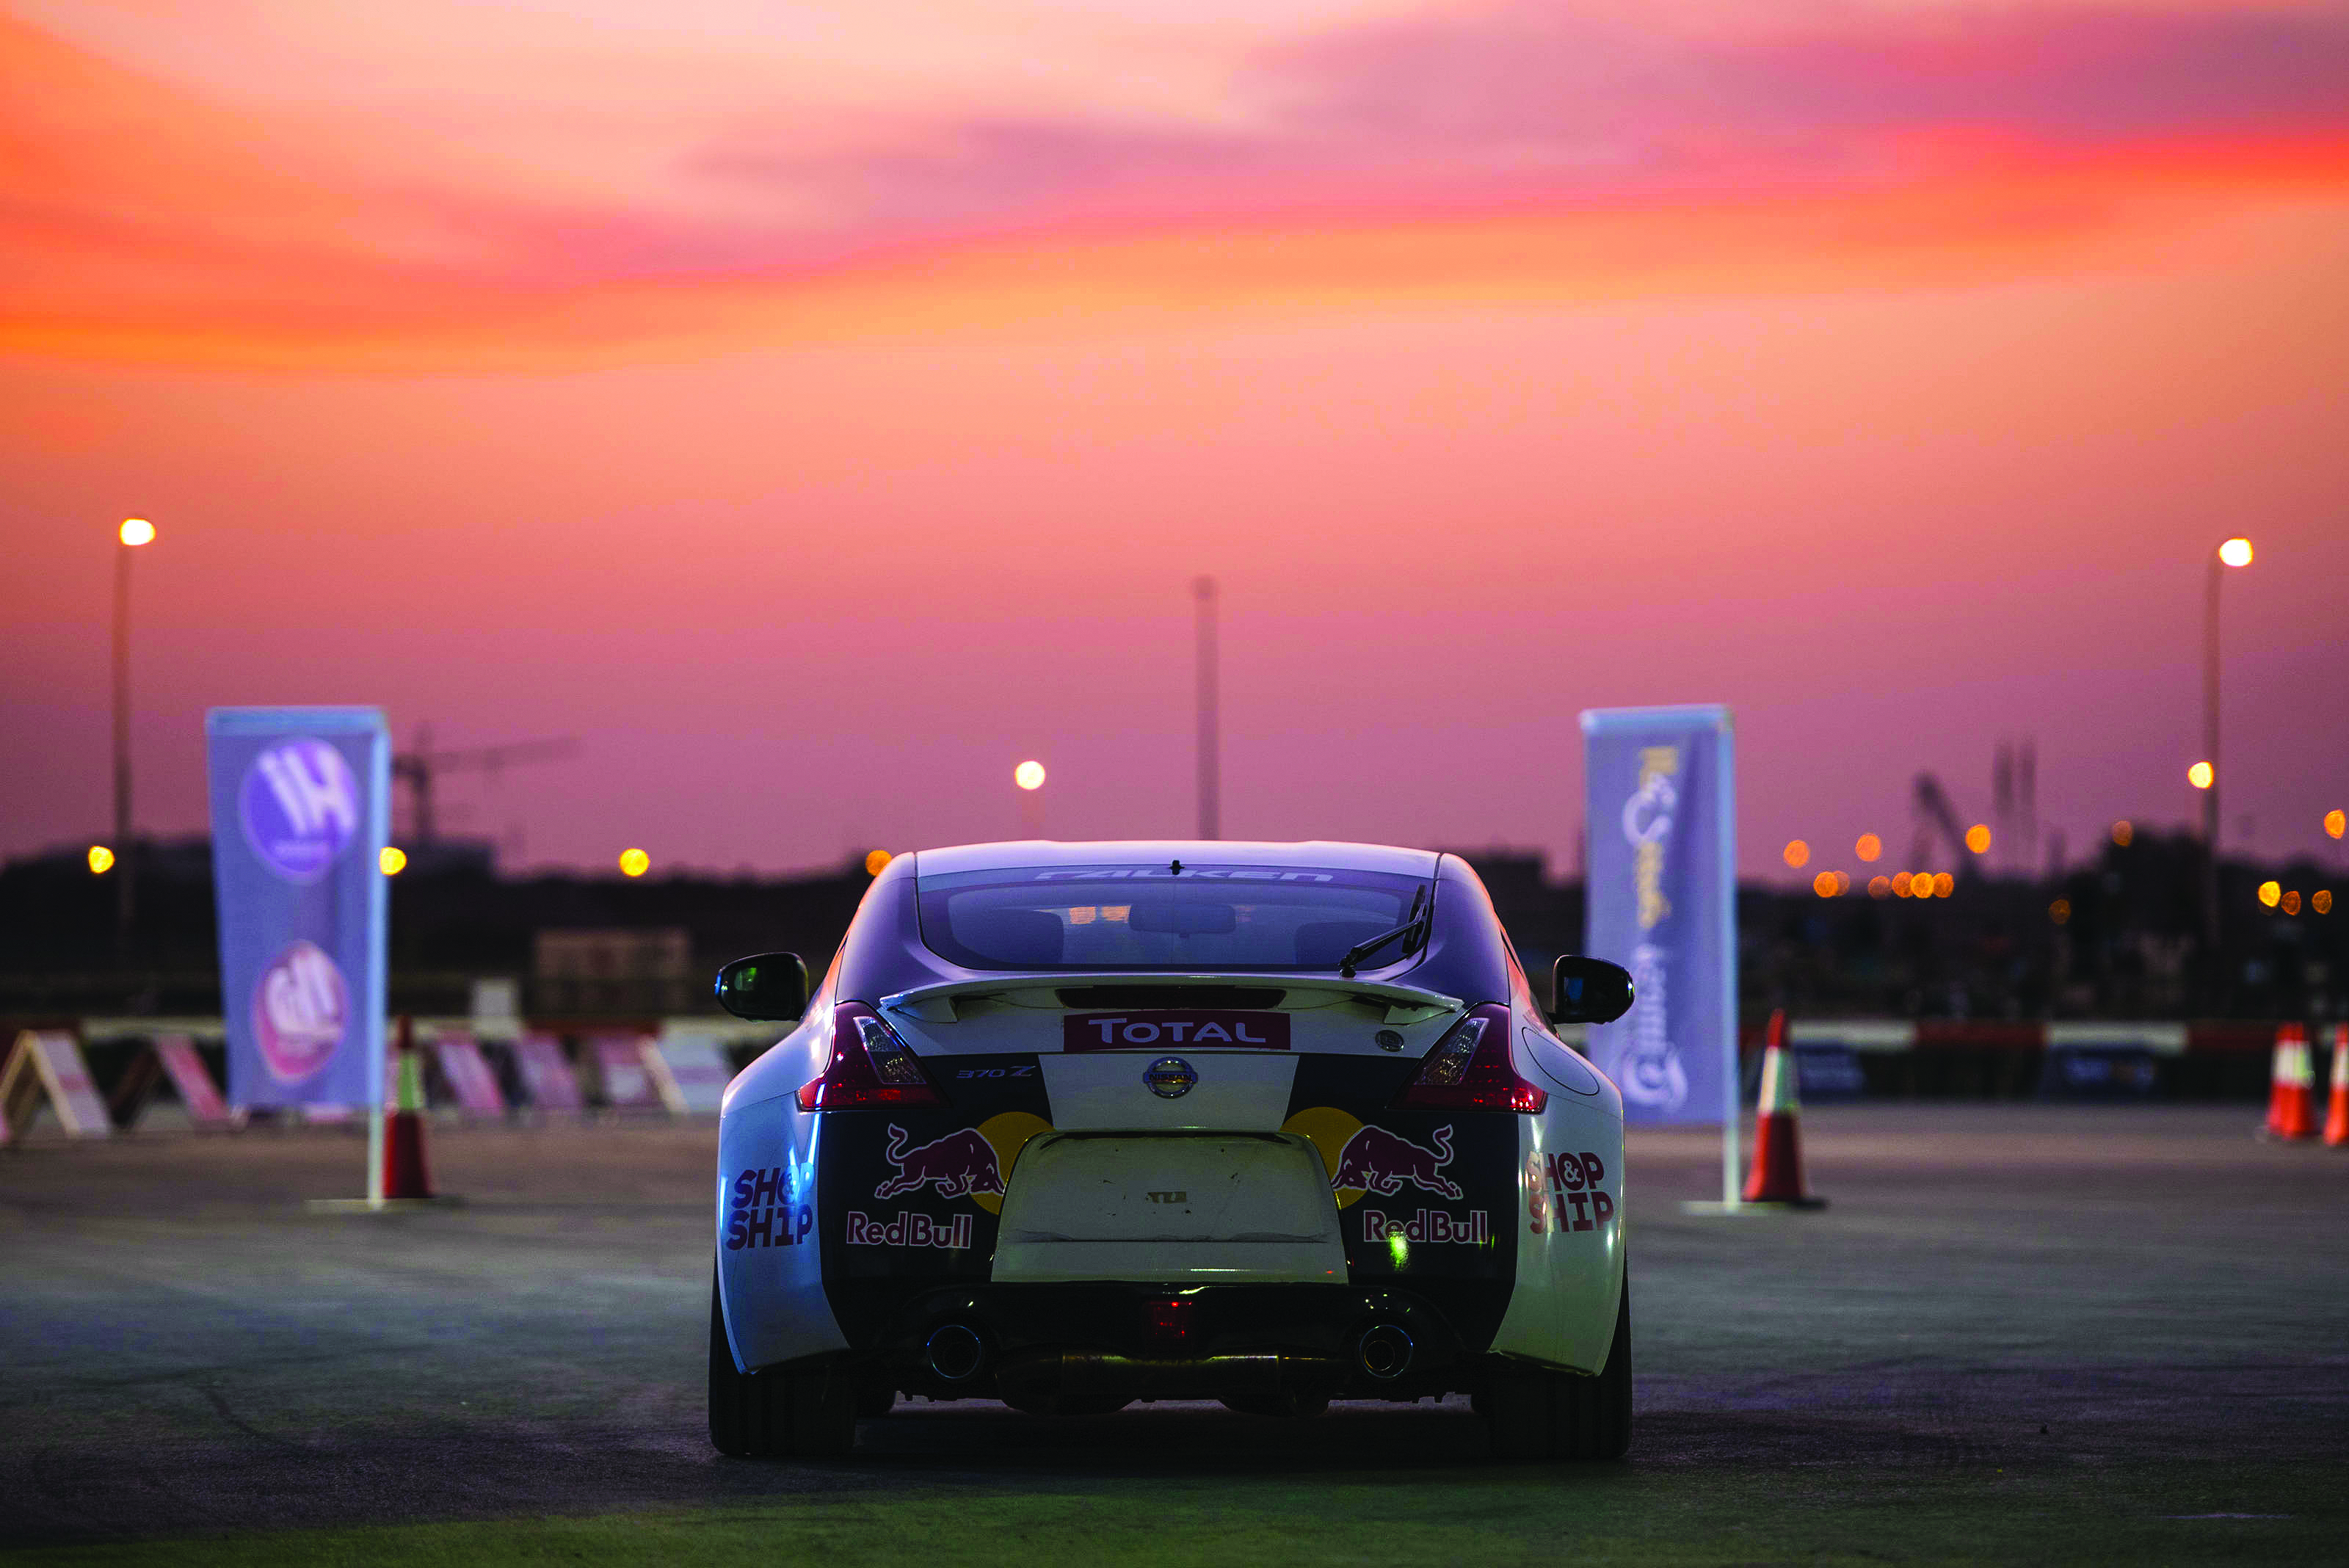 Motorsport enthusiasts in Oman gear up for Red Bull Car Park Drift final